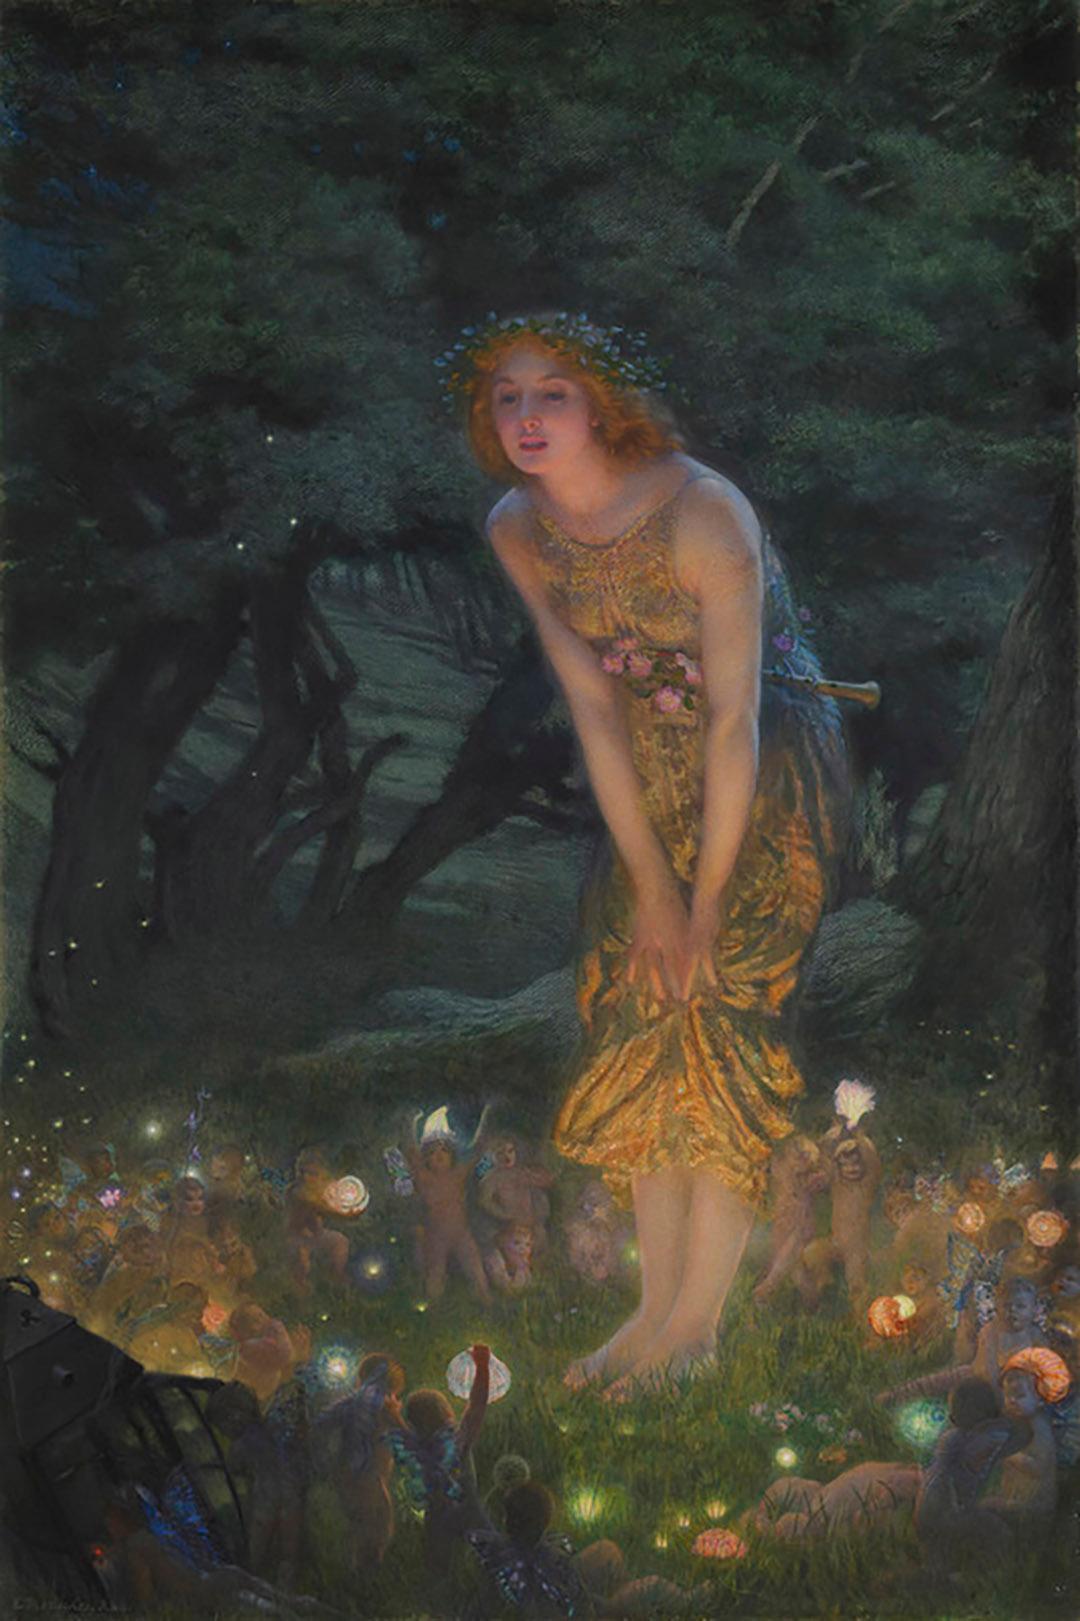 "Midsummer Eve," 1851–1914, by Edward Robert Hughes. Watercolor with gouache; 45 inches by 30 inches. (Public Domain)